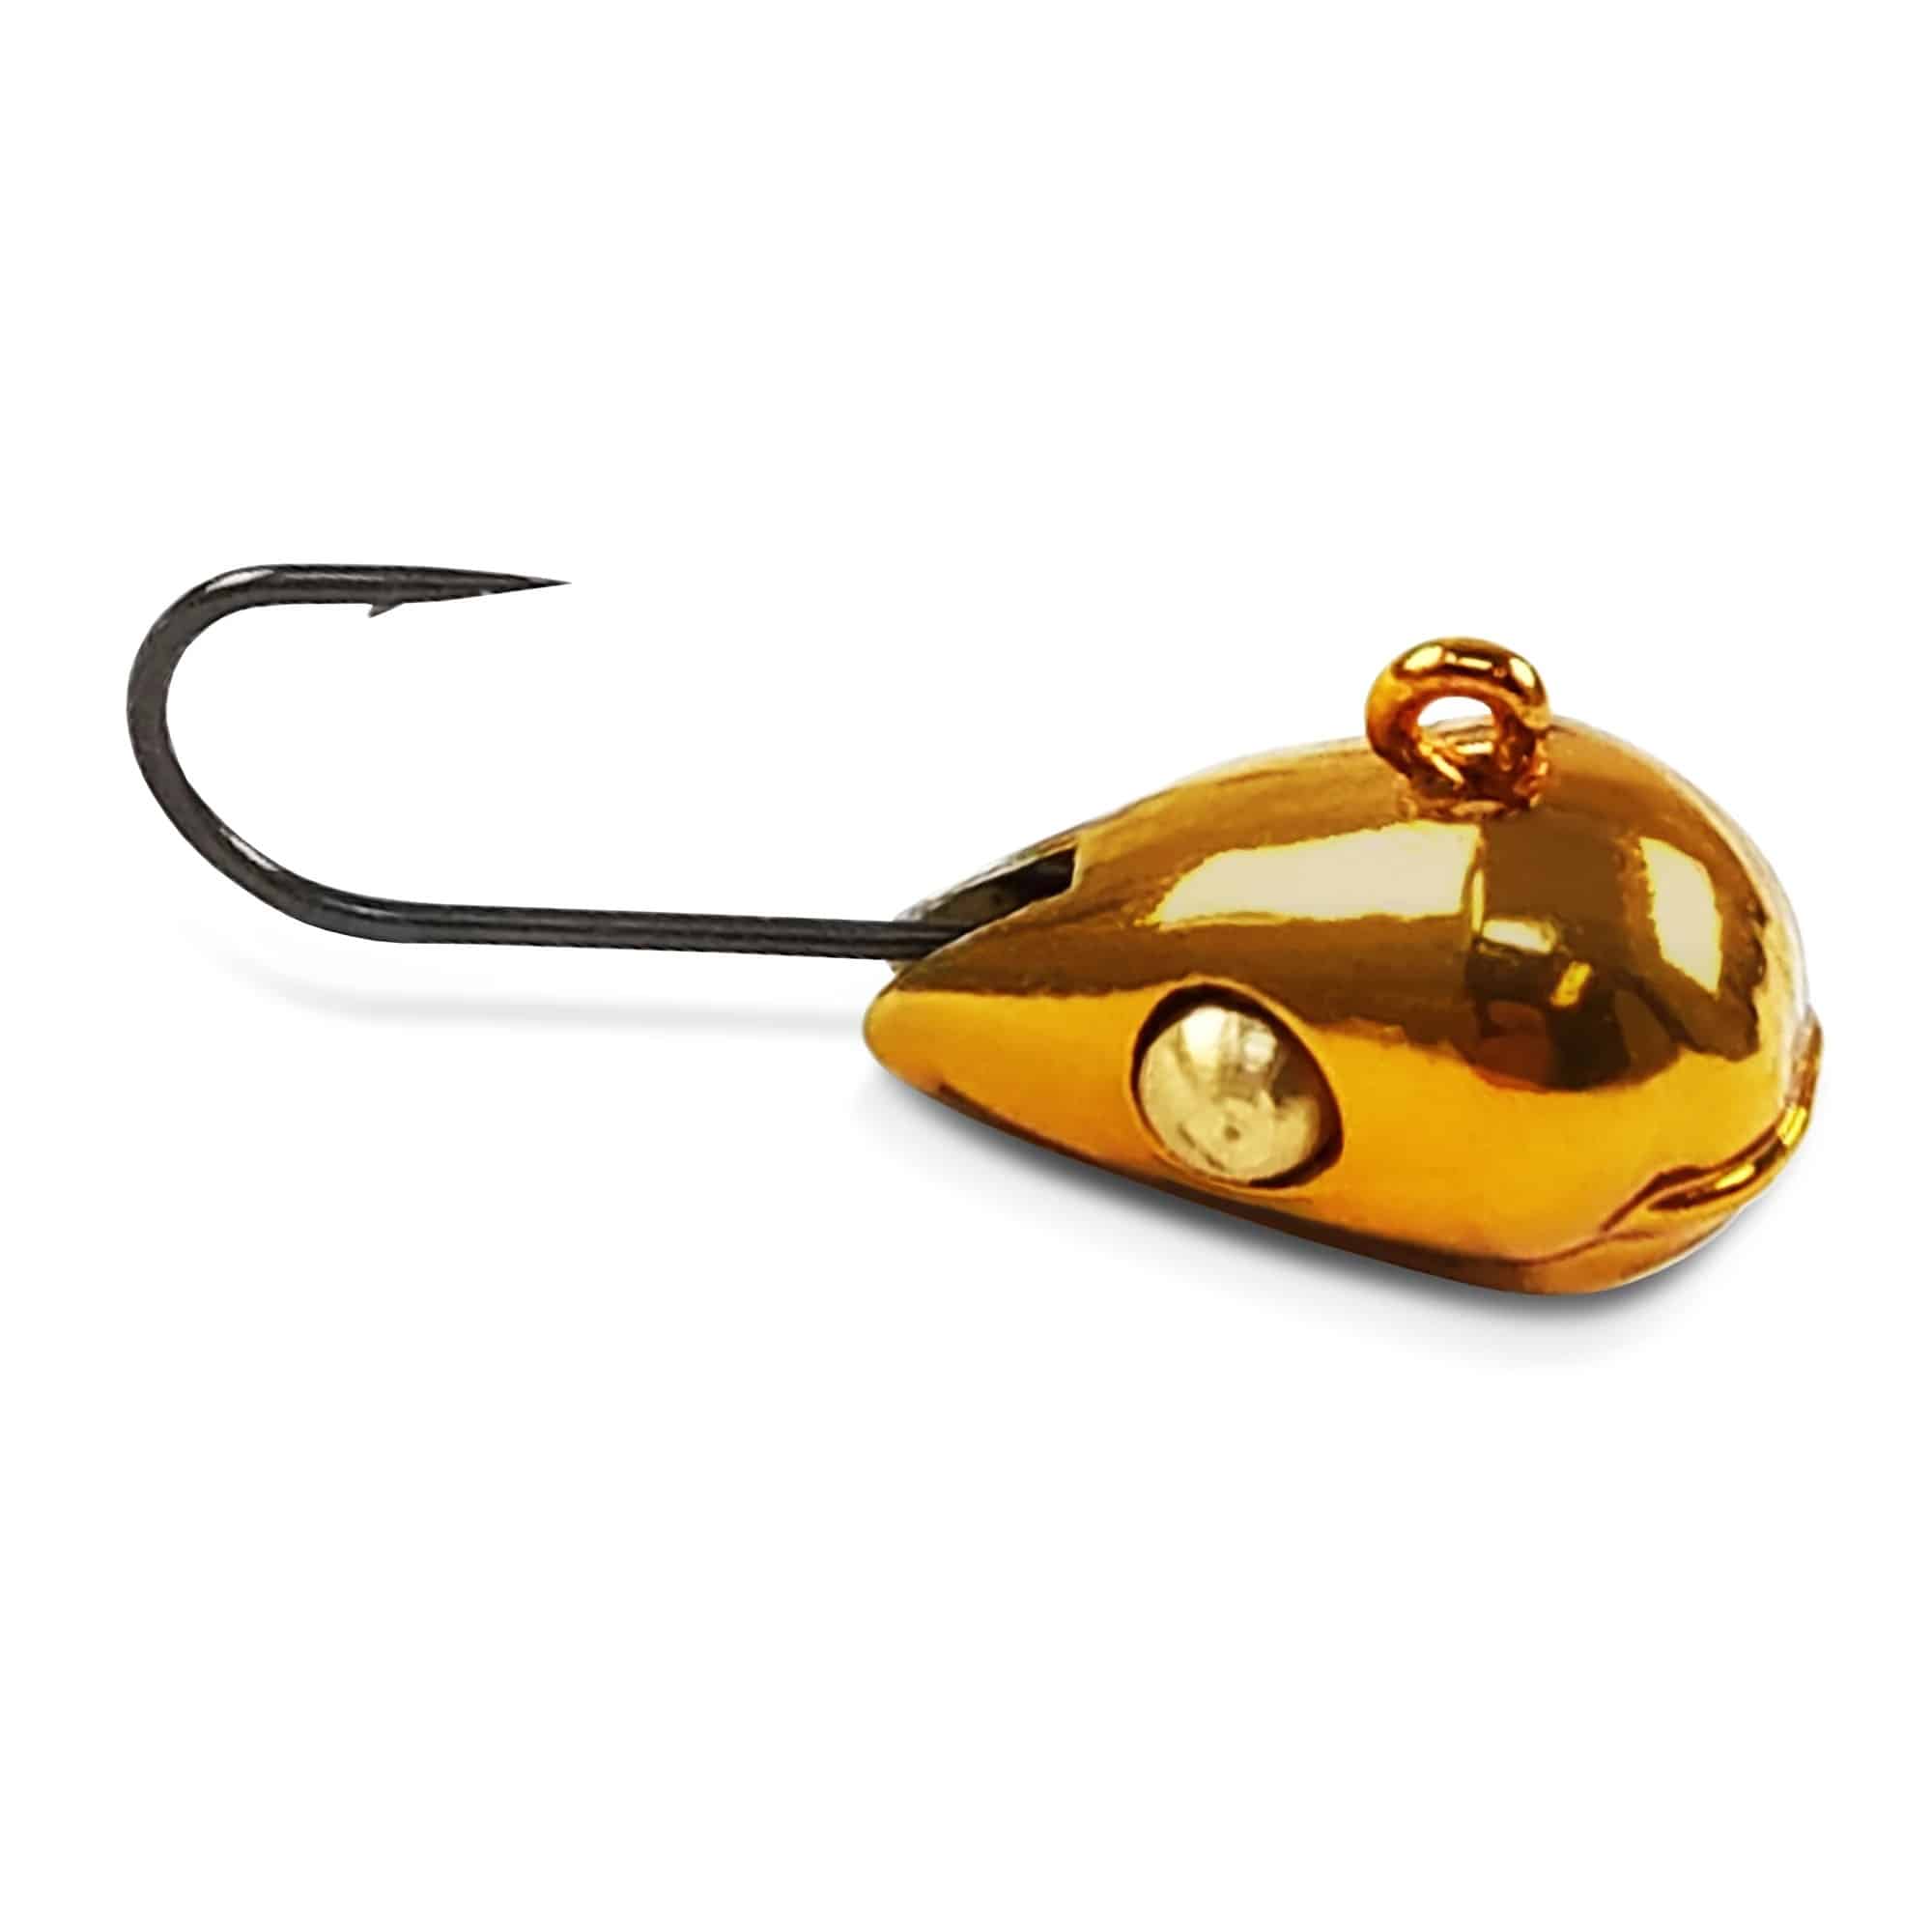 Acme Tackle Tungsten Sling Blade Ice Jig #5 - Golden Nugget